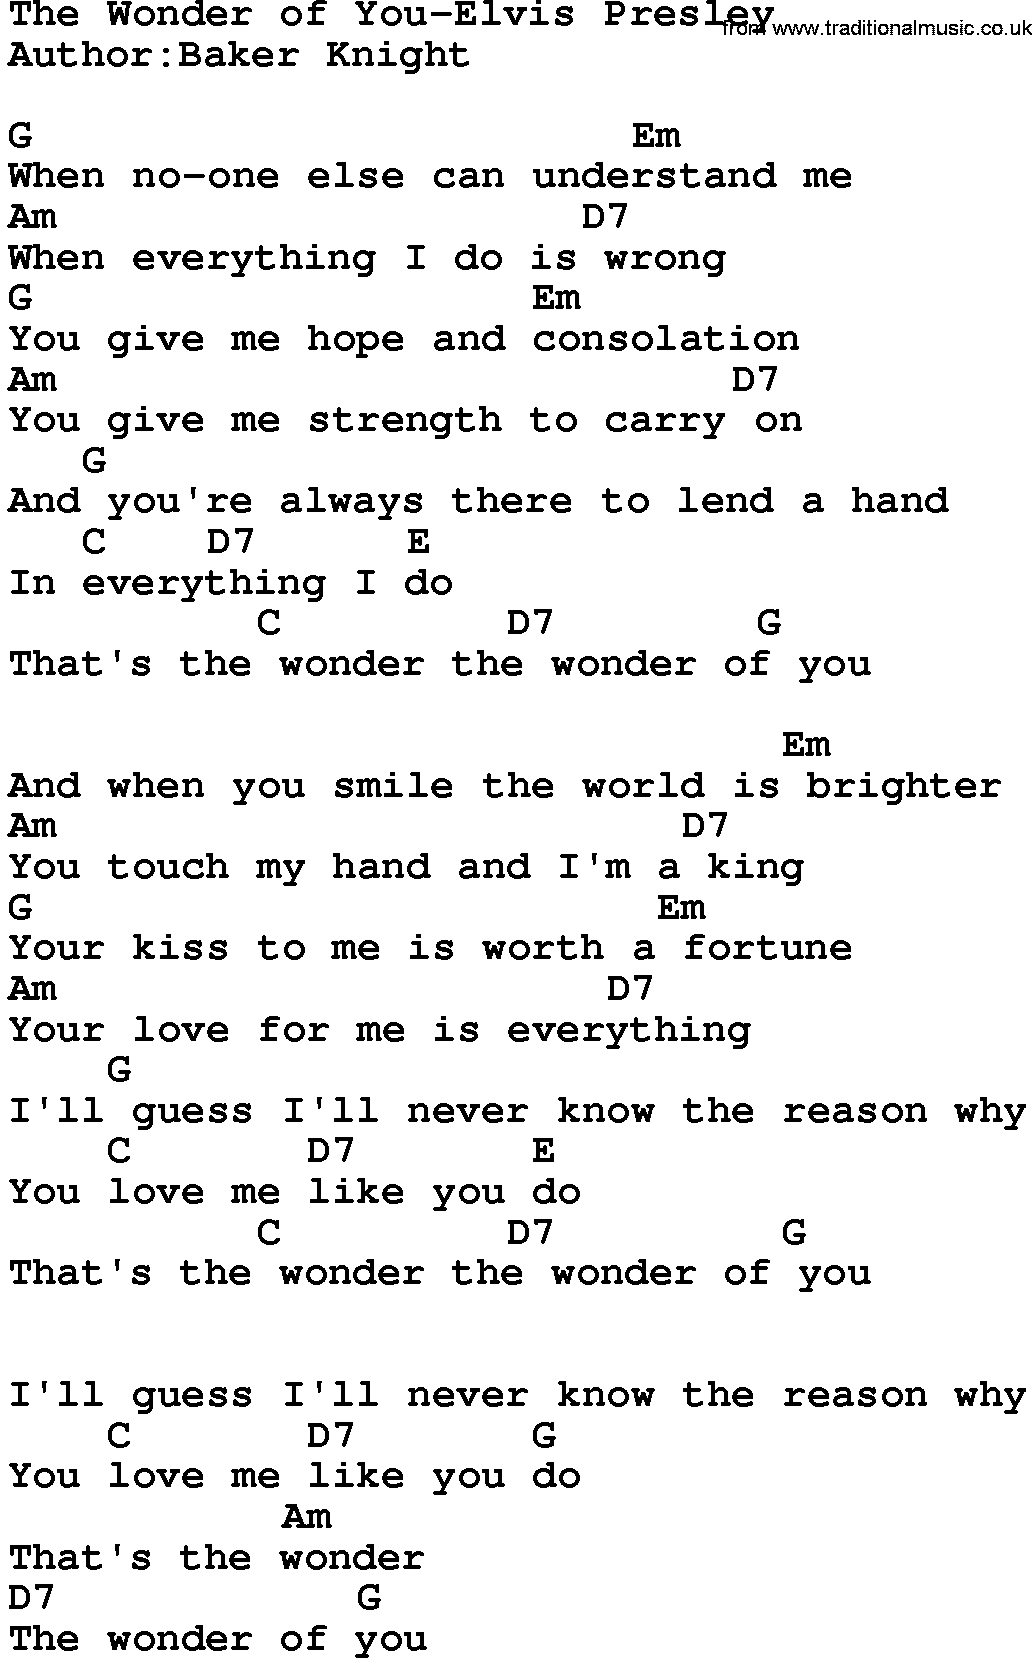 Country music song: The Wonder Of You-Elvis Presley lyrics and chords